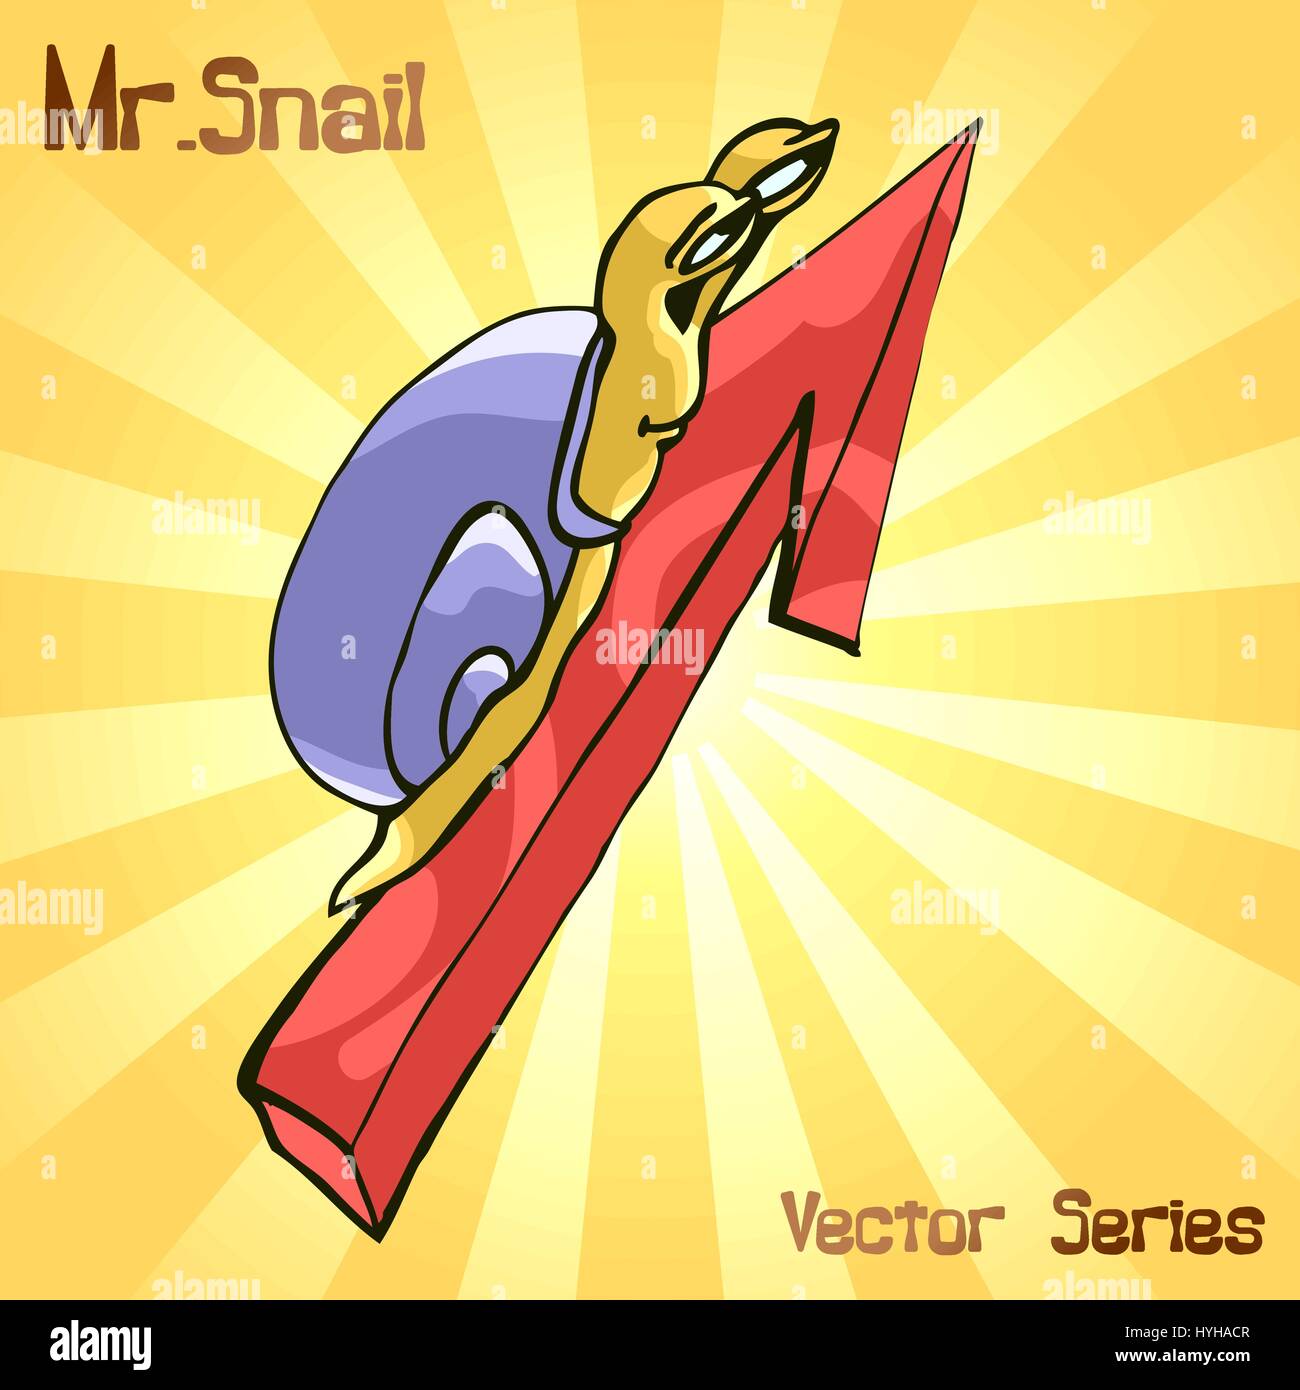 Mr. Snail with growth. vector illustration  Stock Vector